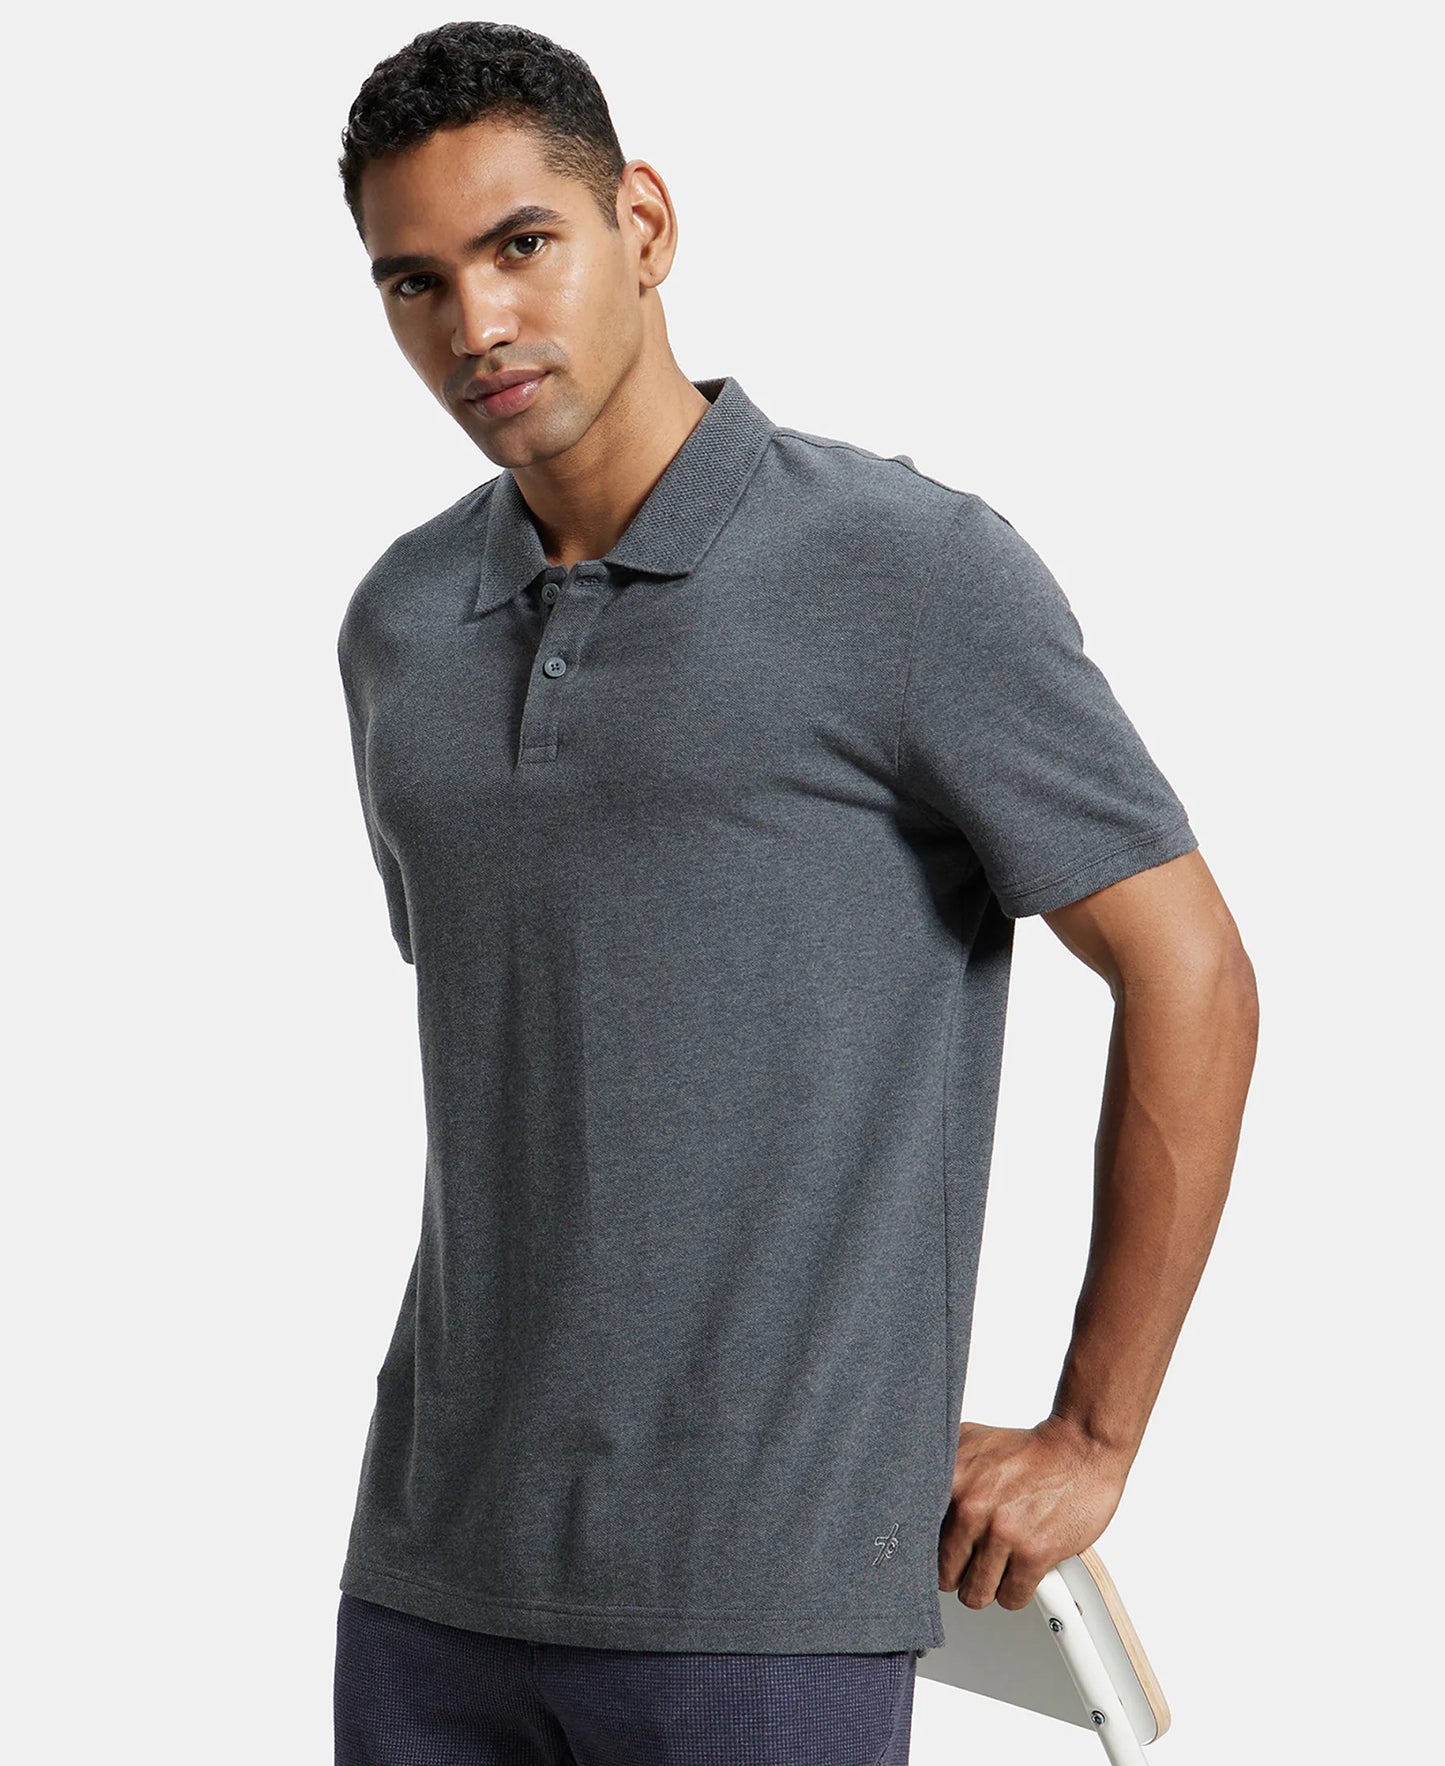 Super Combed Cotton Rich Pique Fabric Solid Half Sleeve Polo T-Shirt - Charcoal Melange-5